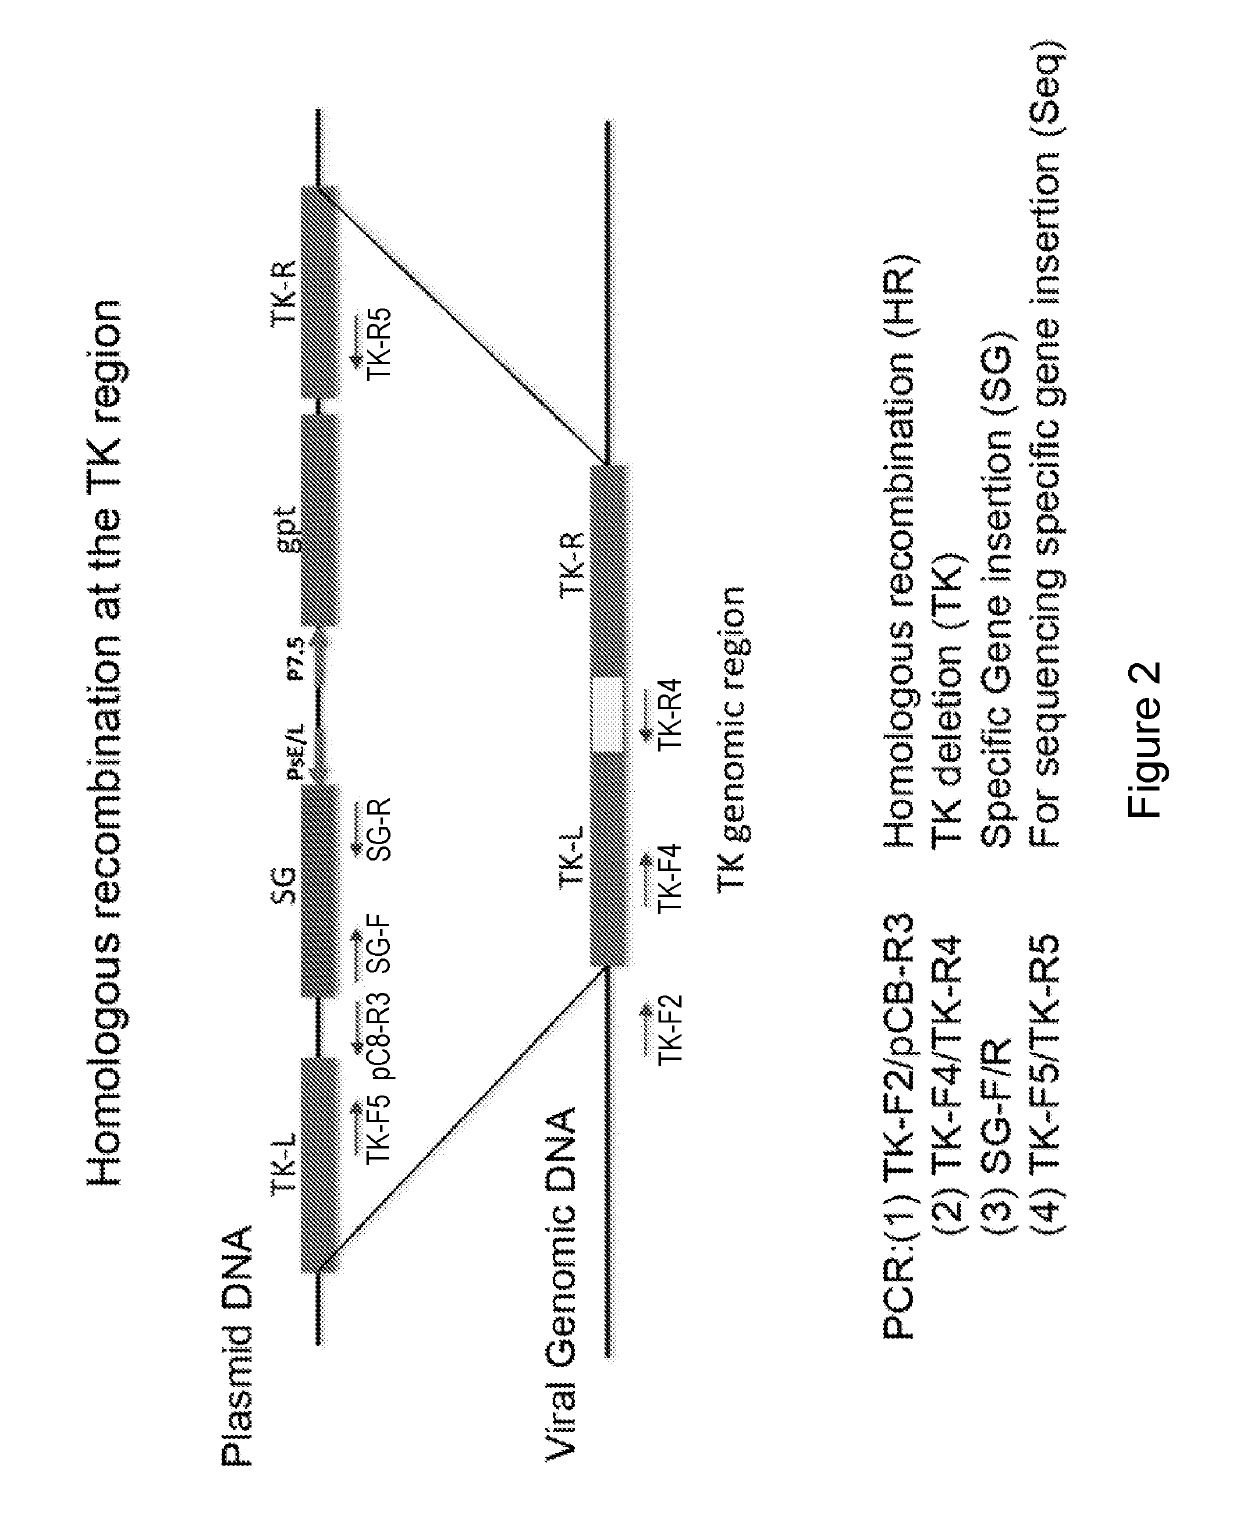 Replication competent attenuated vaccinia viruses with deletion of thymidine kinase with and without the expression of human Flt3L or GM-CSF for cancer immunotherapy